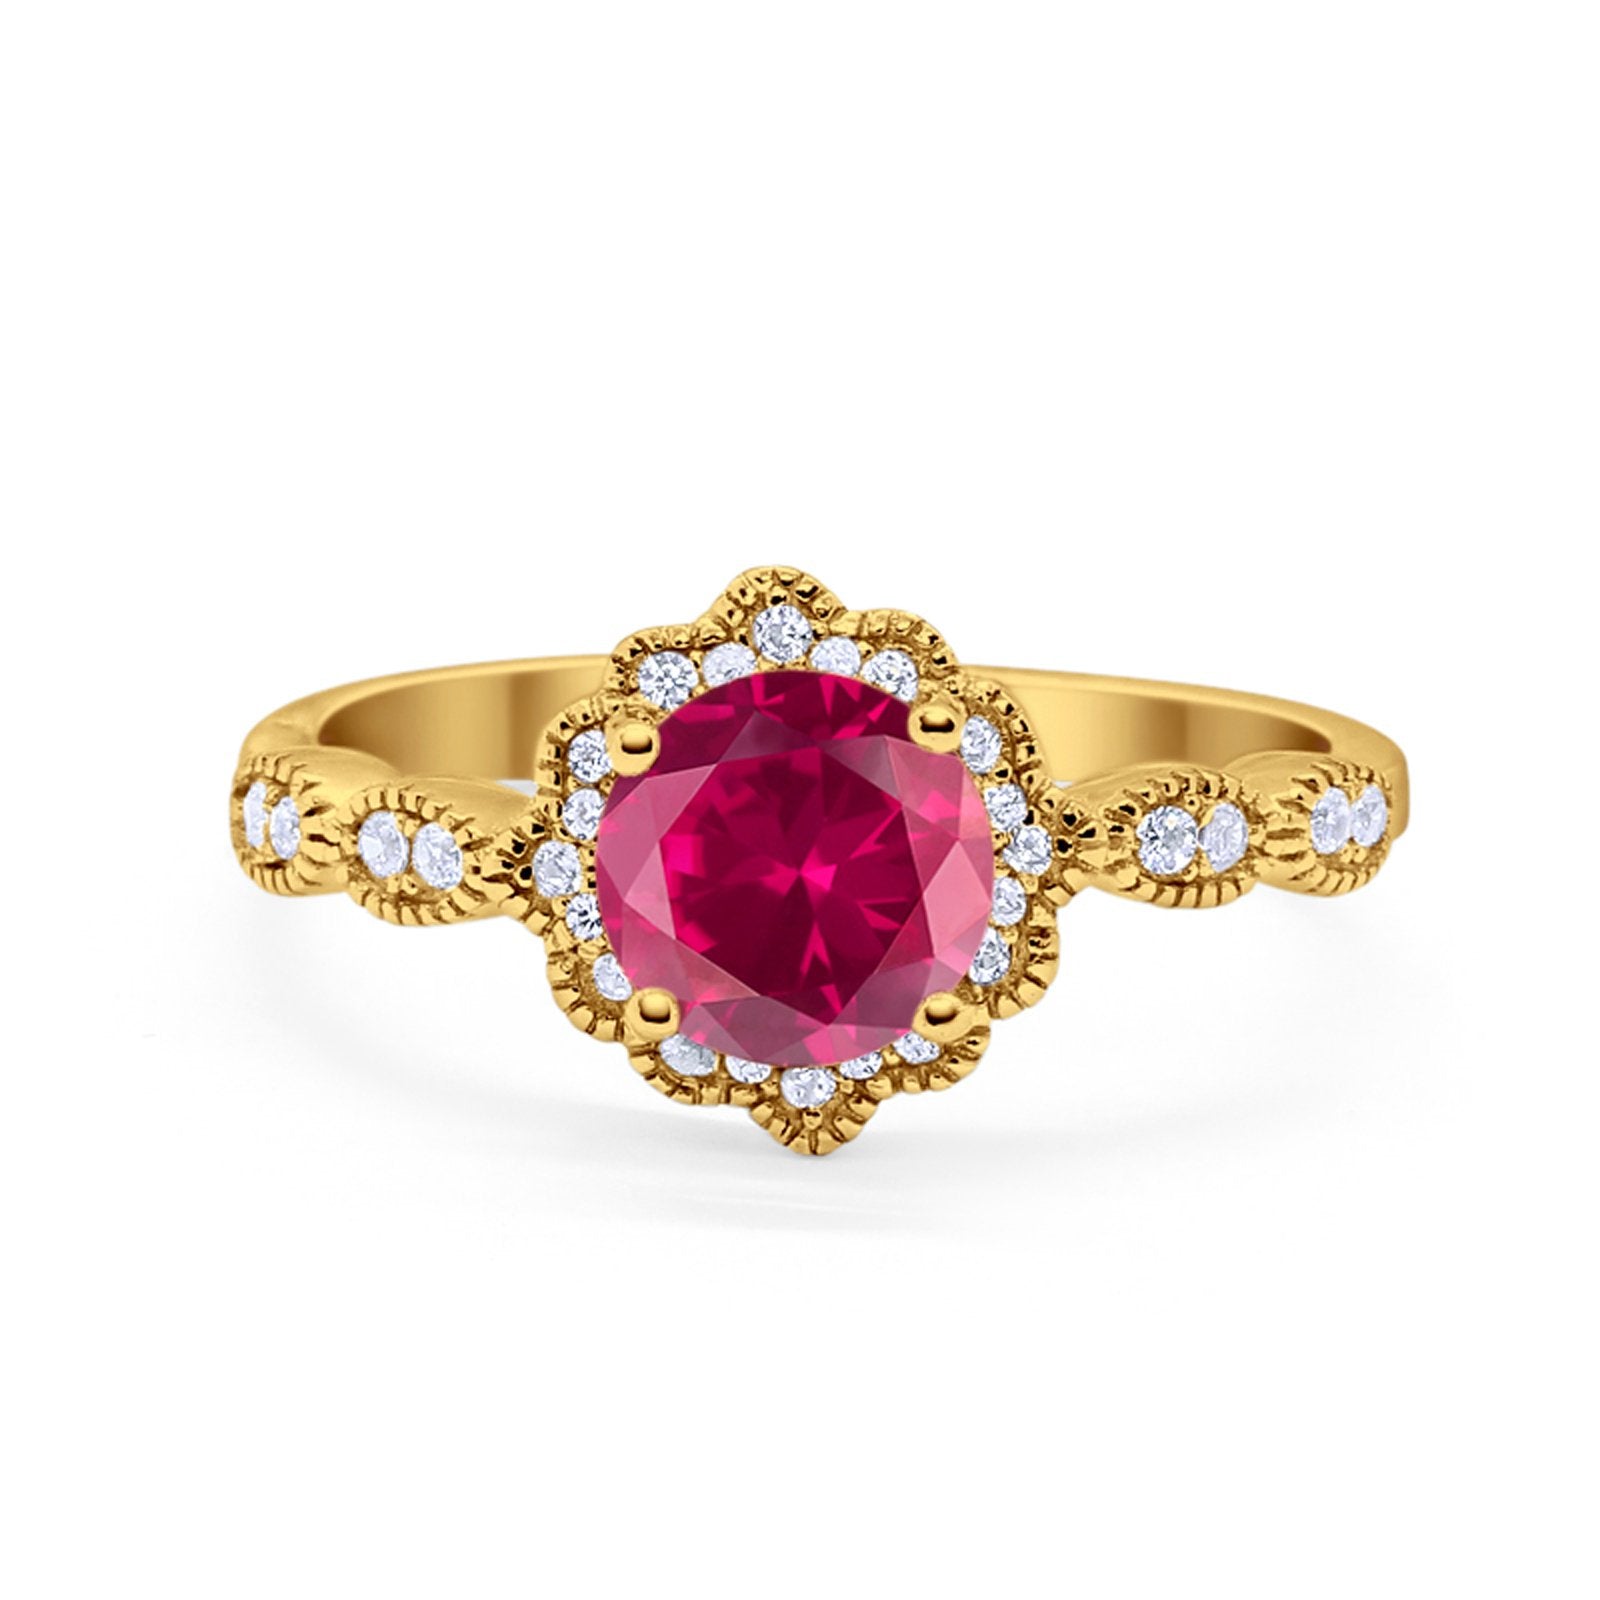 Halo Floral Art Deco Wedding Ring Yellow Tone, Simulated Ruby CZ 925 Sterling Silver